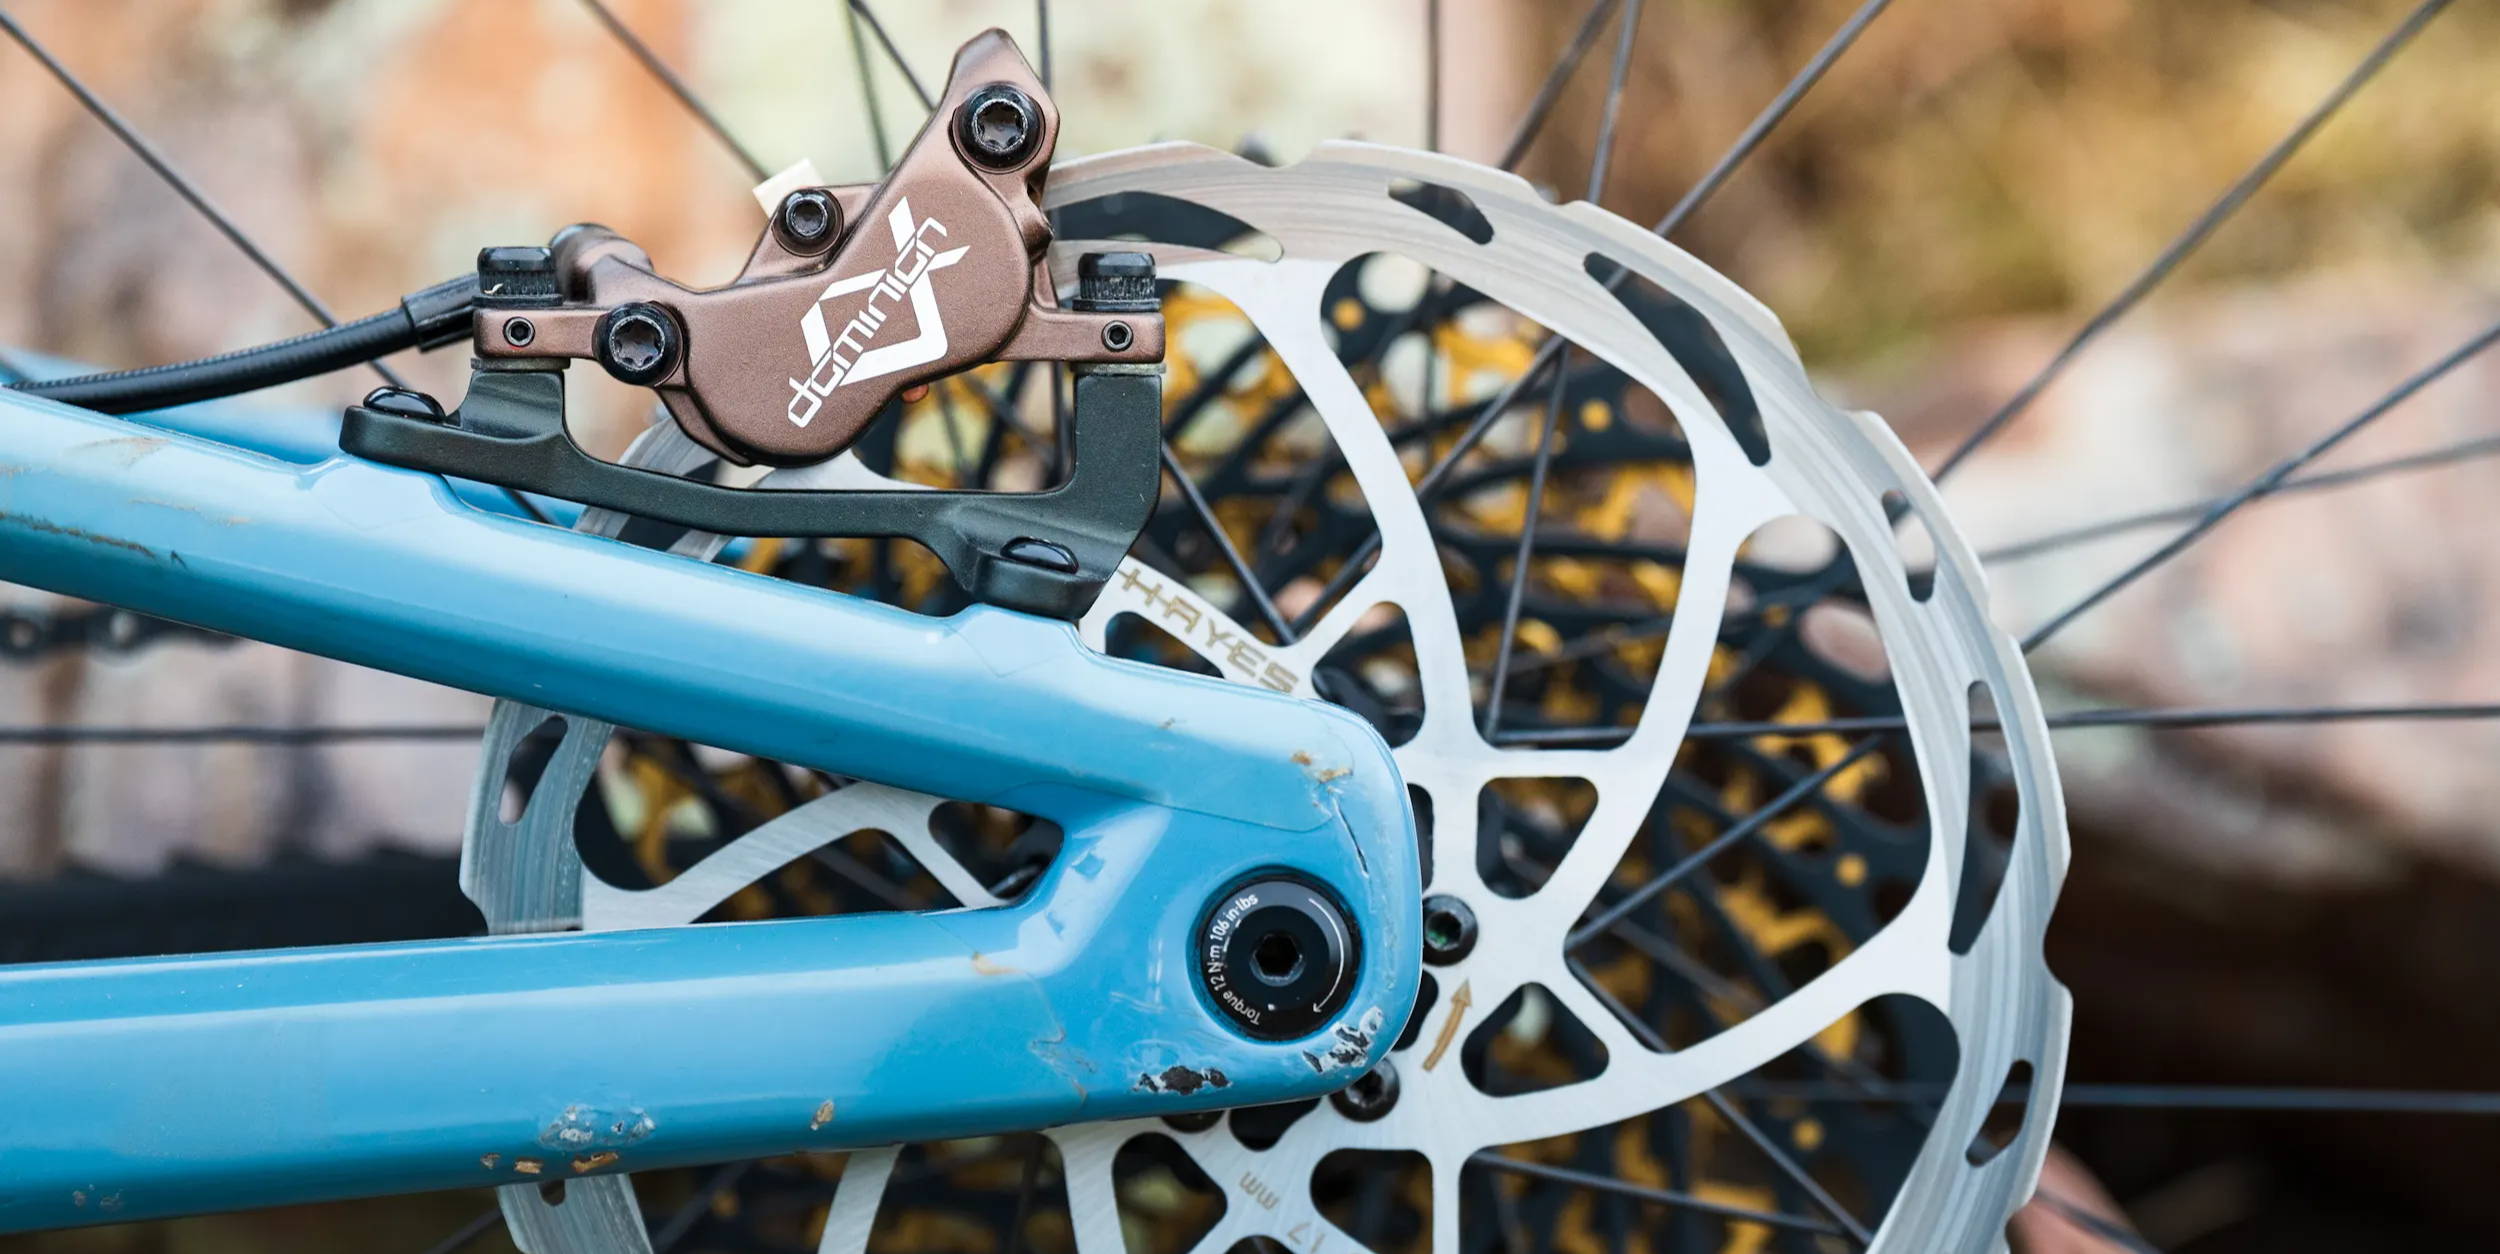 Hayes Dominion A4 Brakes | Rider Review